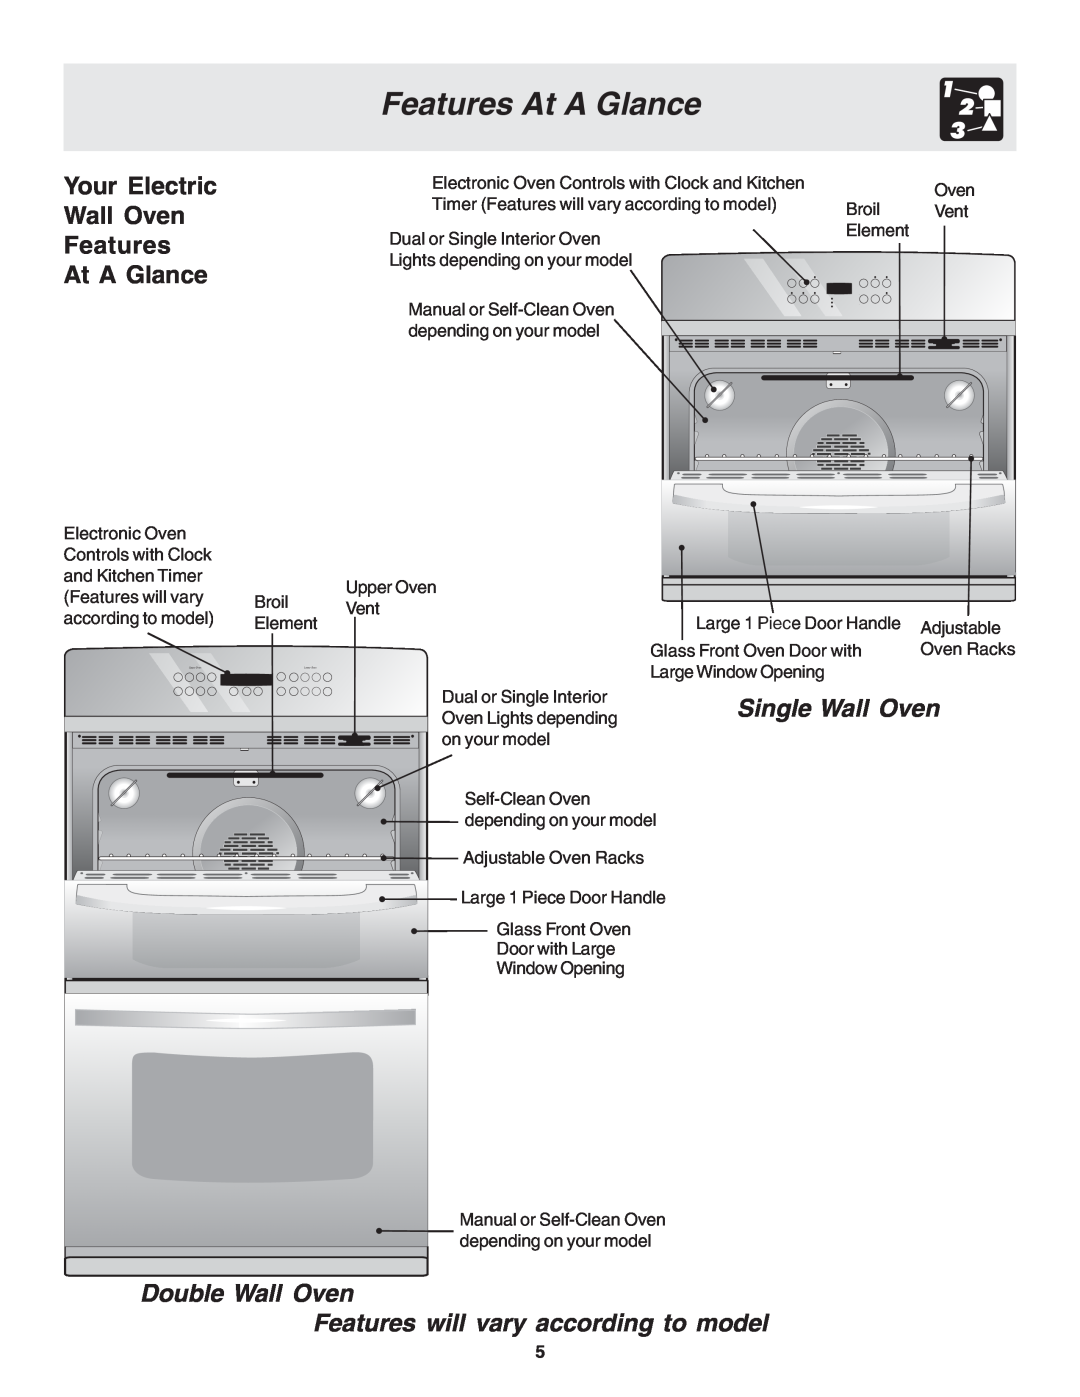 Frigidaire 318205116 warranty Your Electric Wall Oven Features At A Glance 